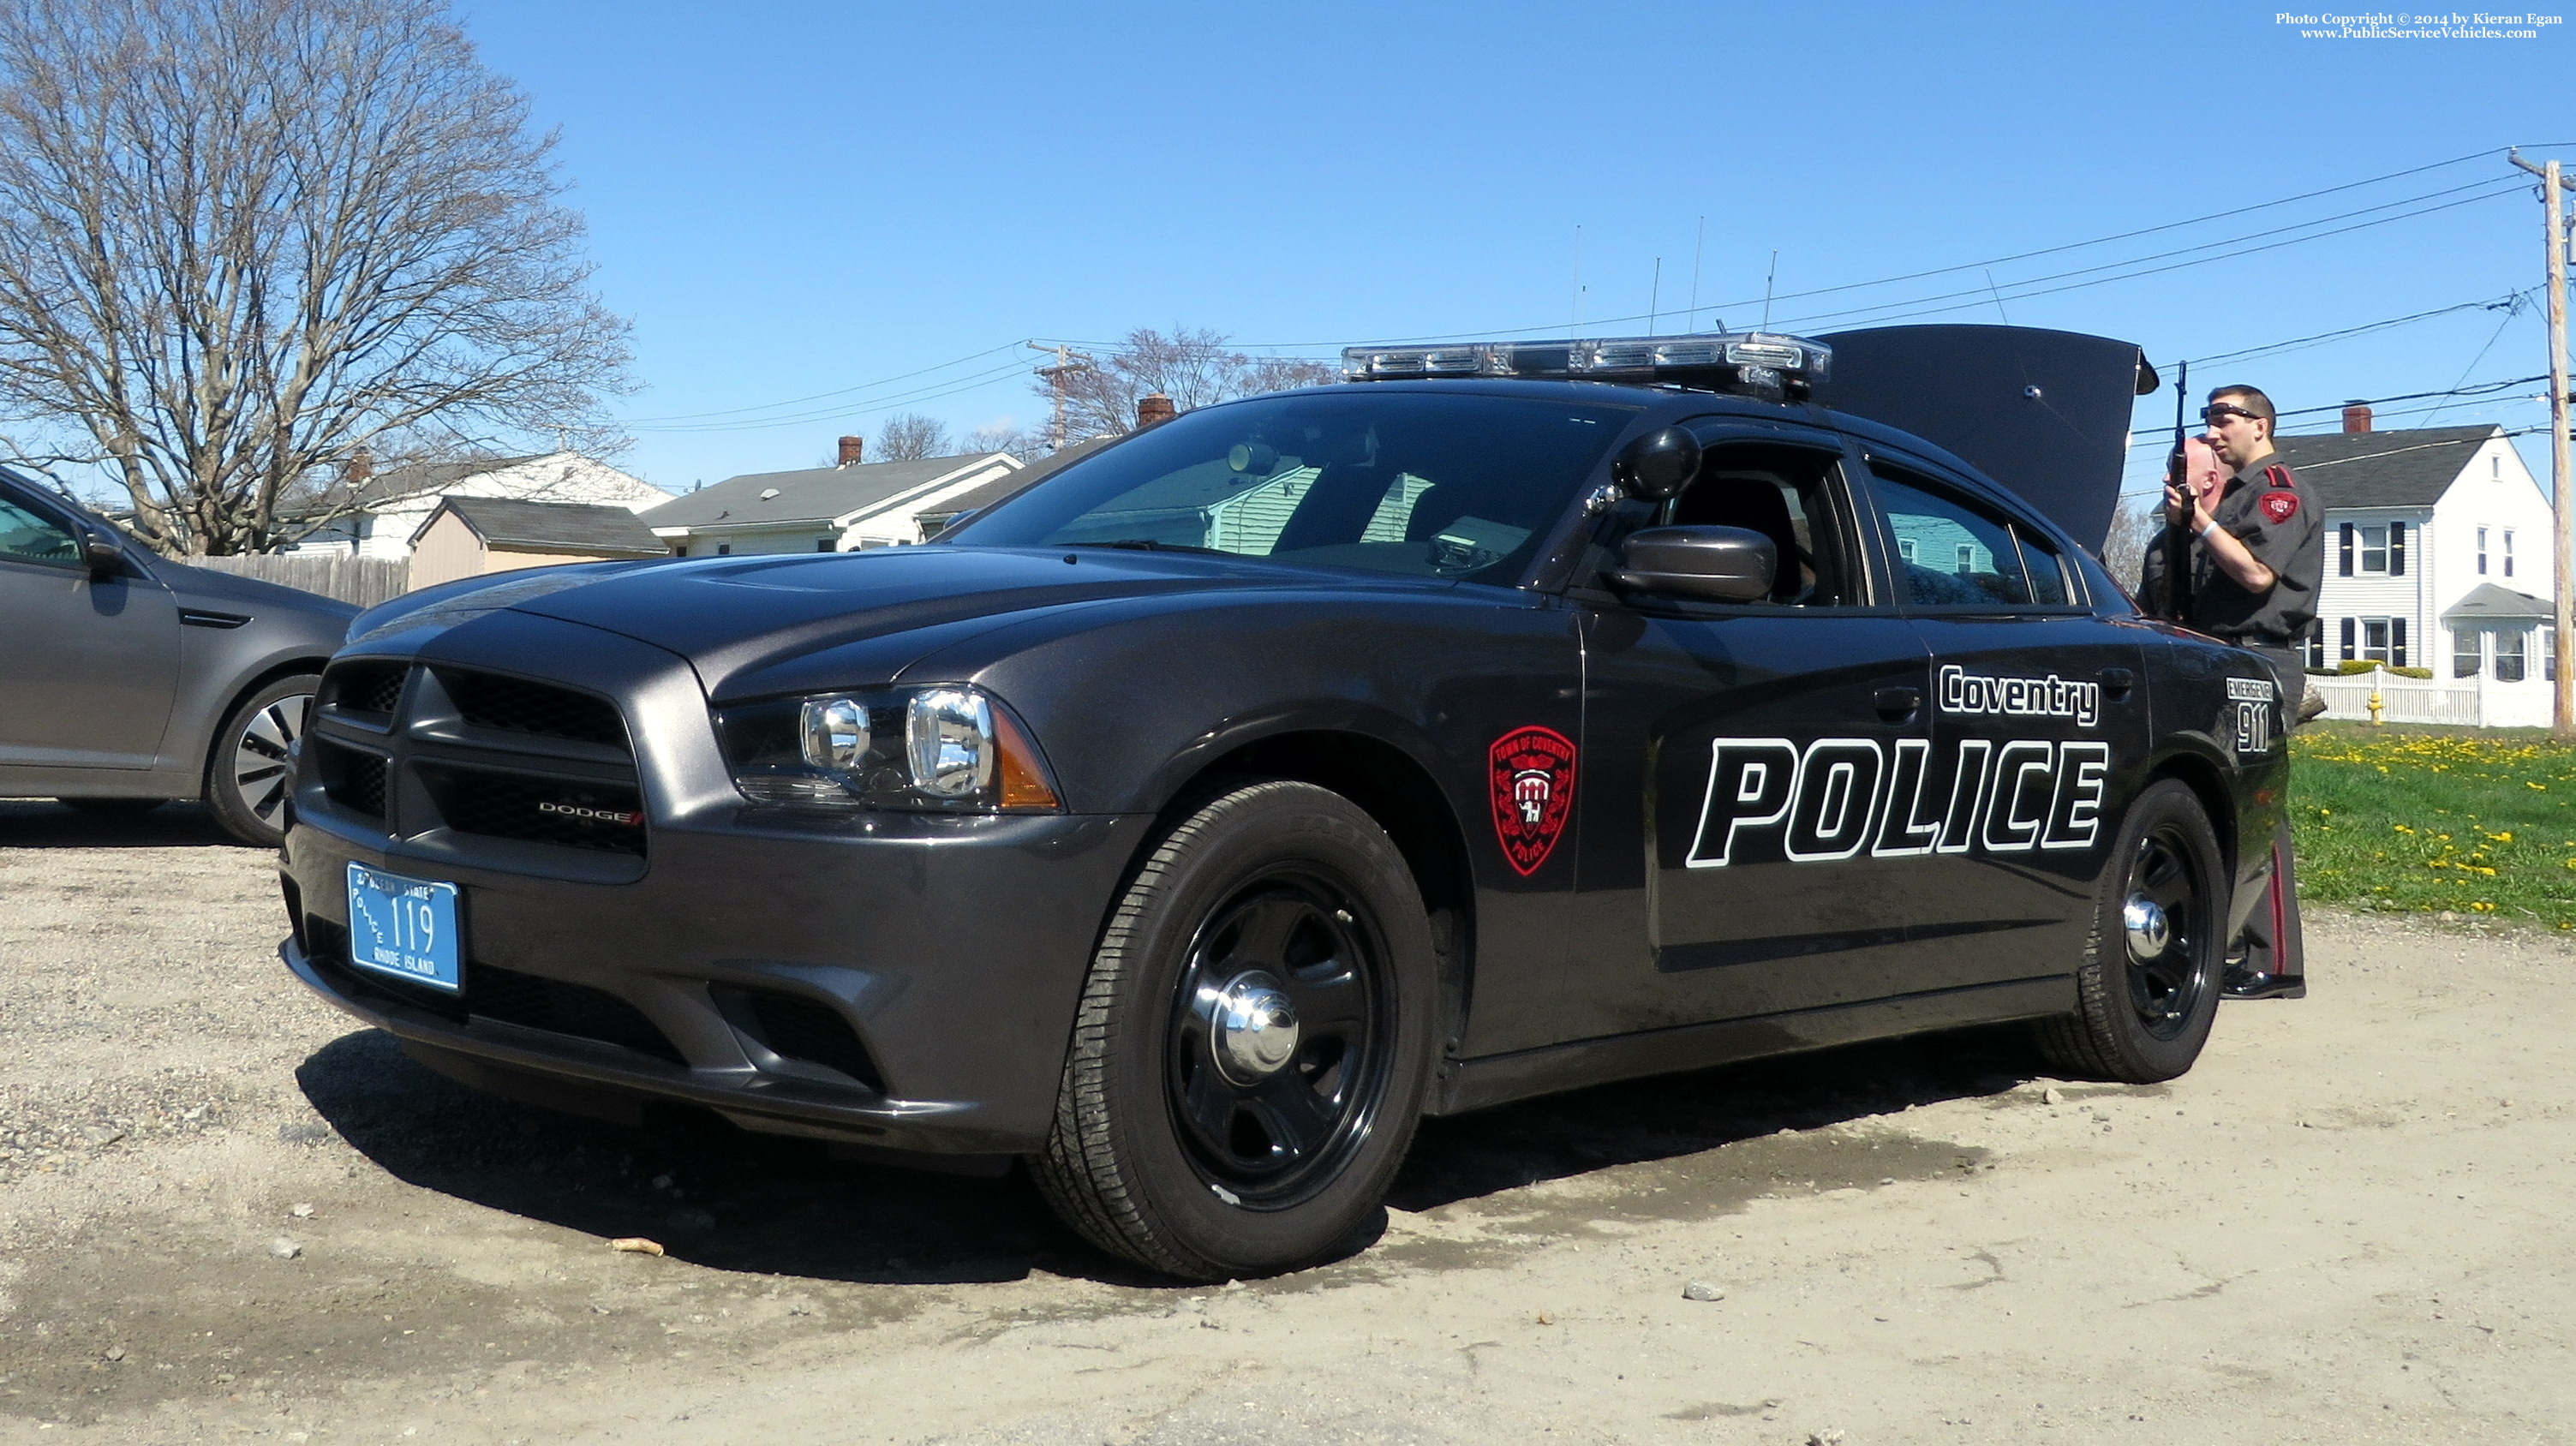 A photo  of Coventry Police
            Cruiser 119, a 2013 Dodge Charger             taken by Kieran Egan